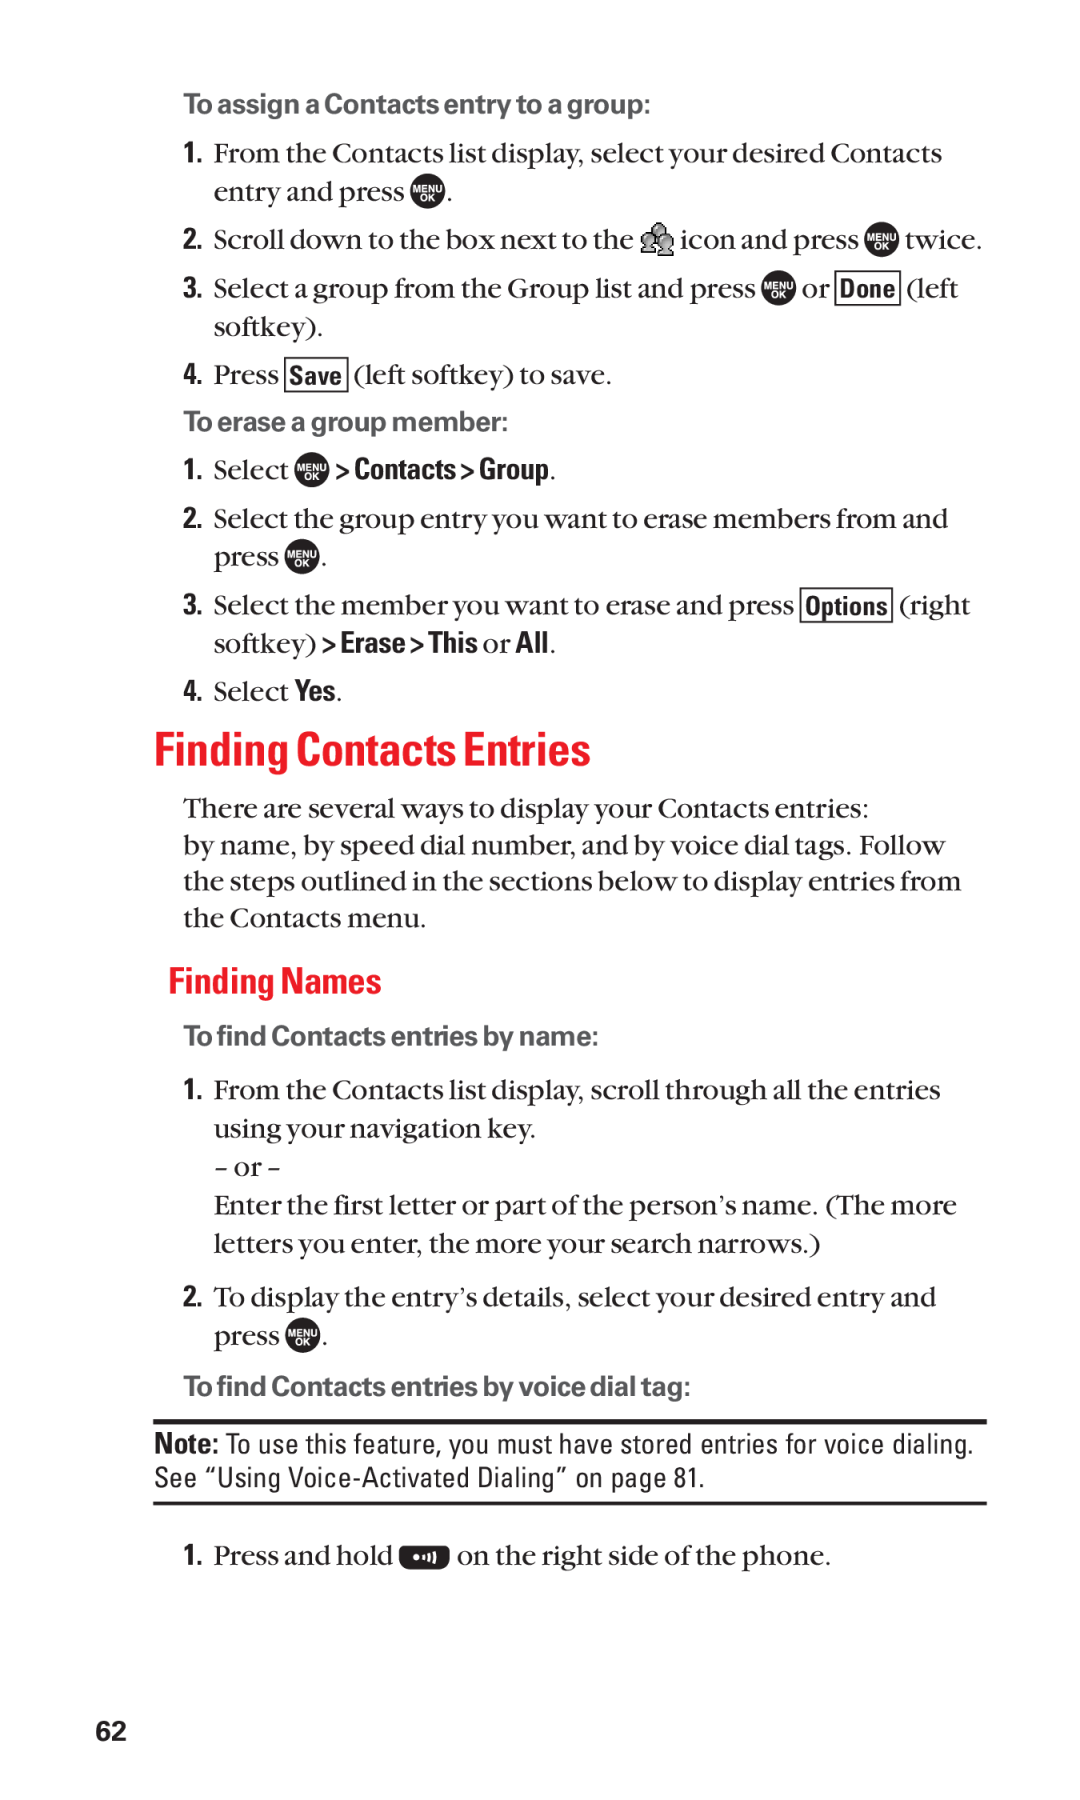 Sanyo SCP-7050 manual Finding Contacts Entries, Finding Names, Select Contacts Group 